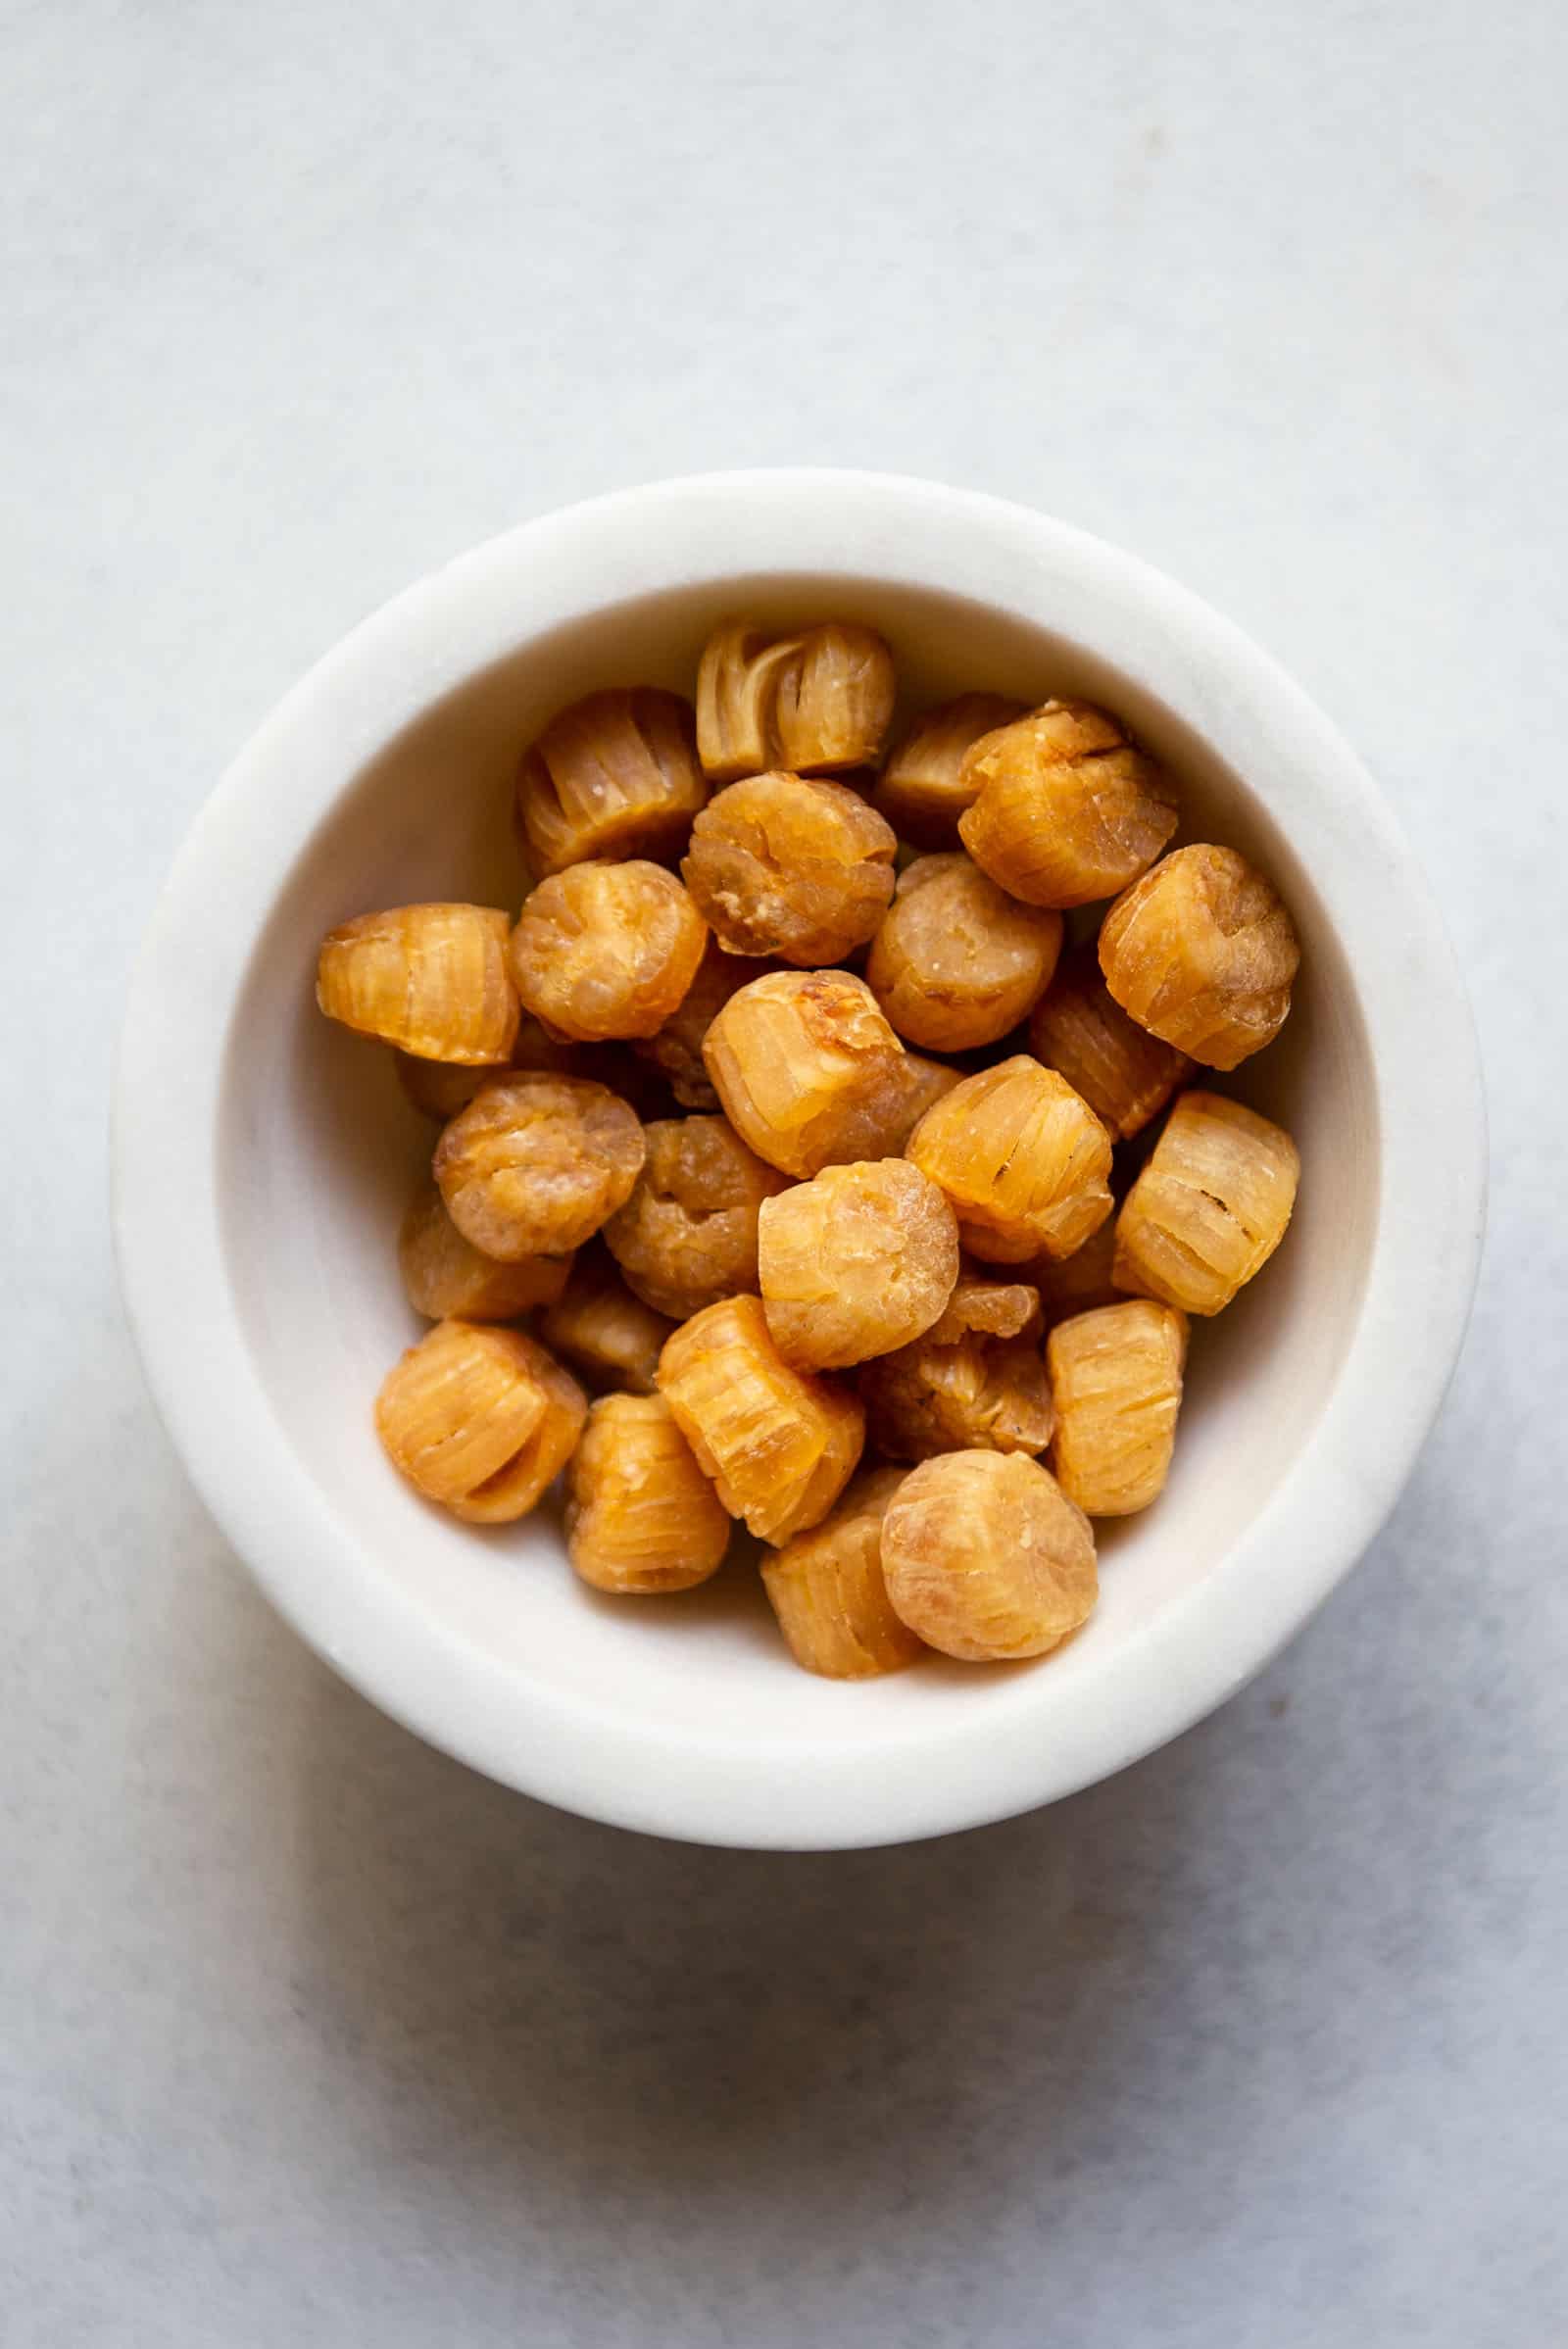 A guide on dried scallops